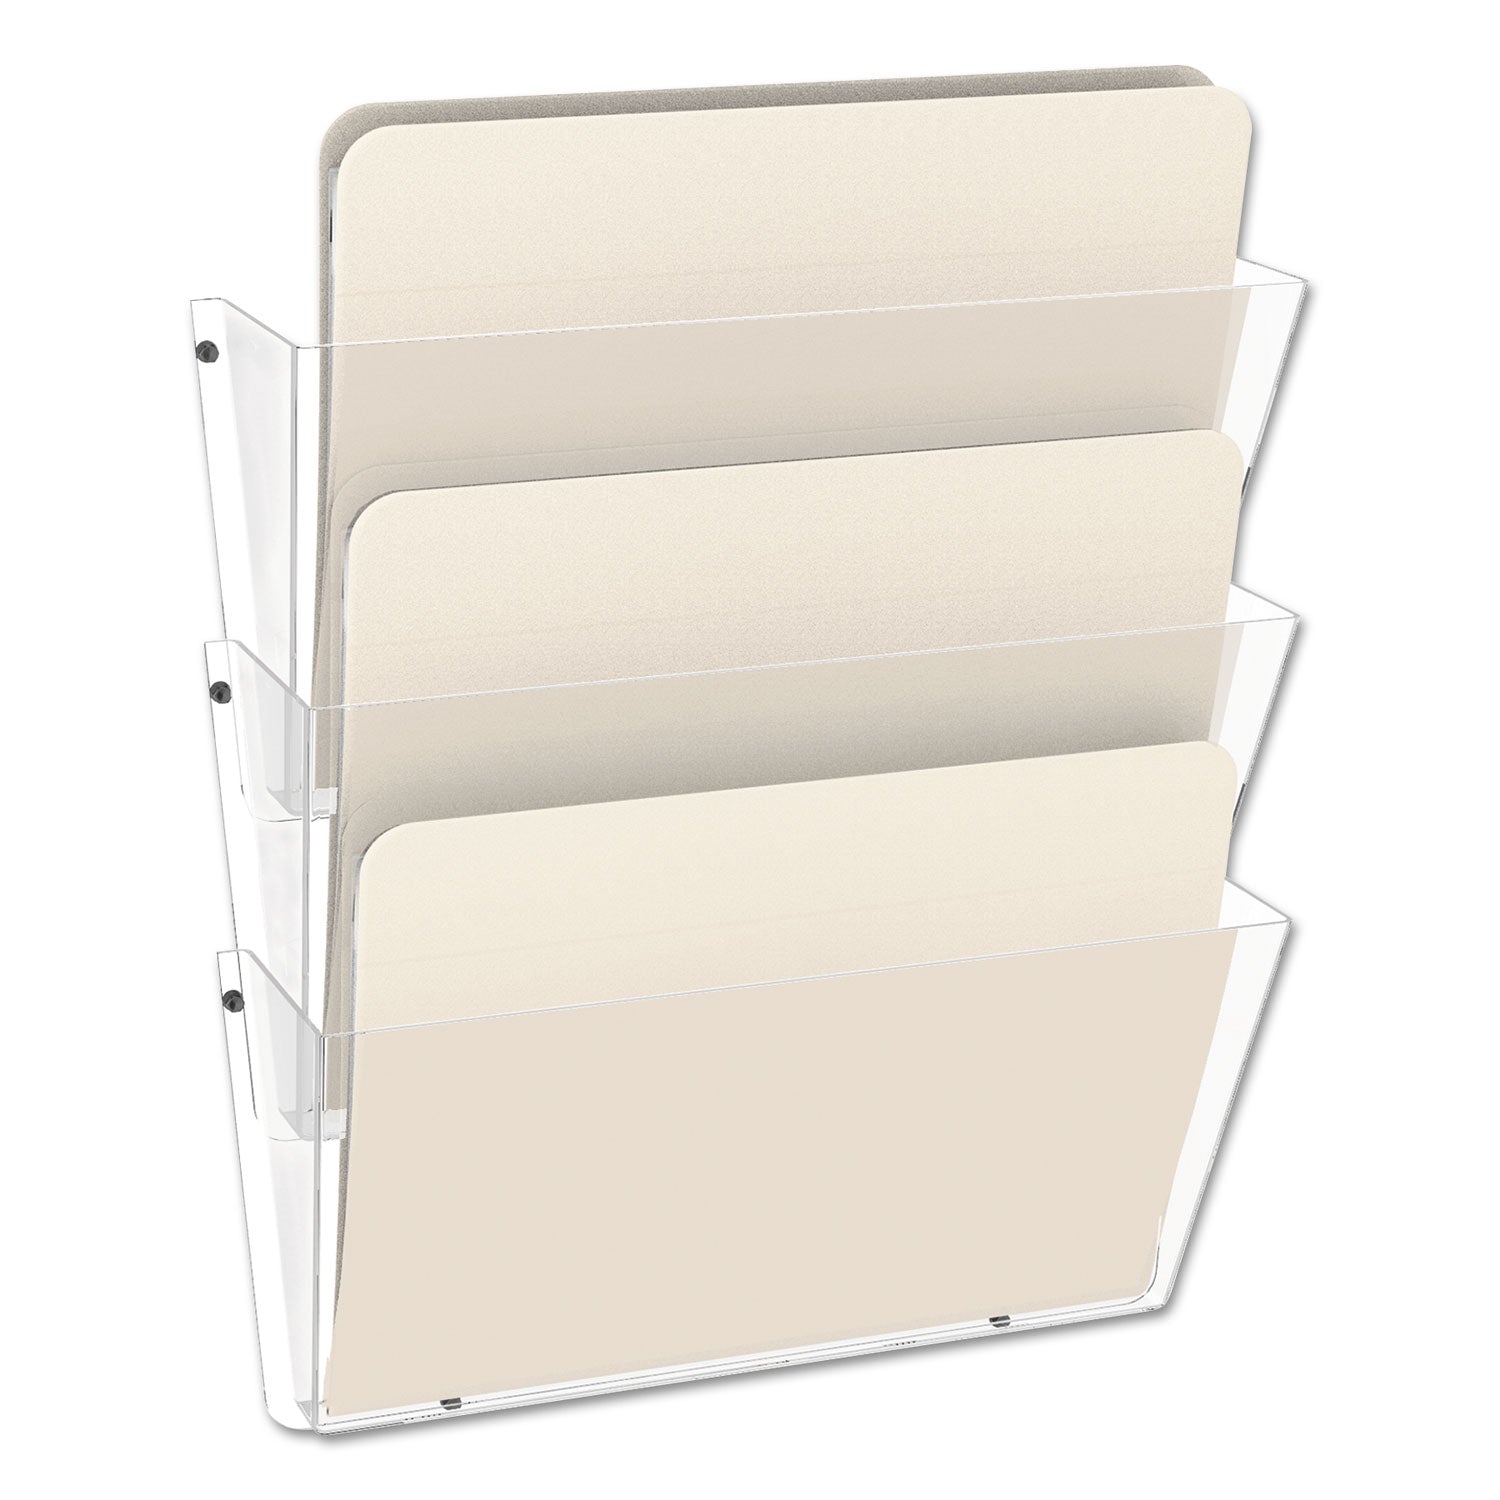 Unbreakable DocuPocket Wall File, 3 Sections, Letter Size, 14.5" x 3" x 6.5", Clear, 3/Pack - 